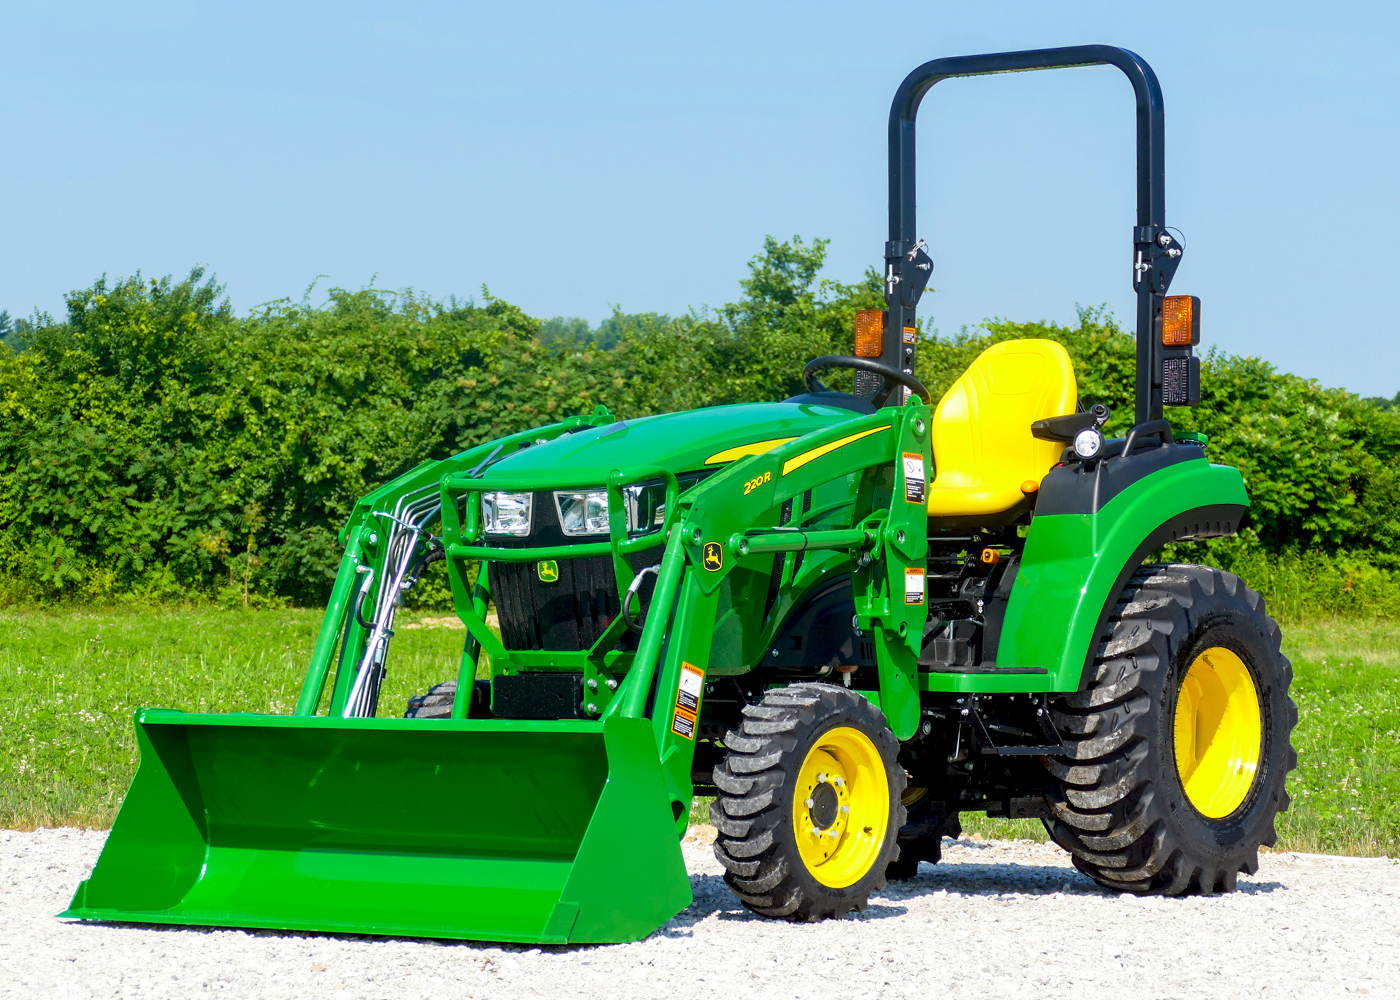 What is the cheapest compact tractor